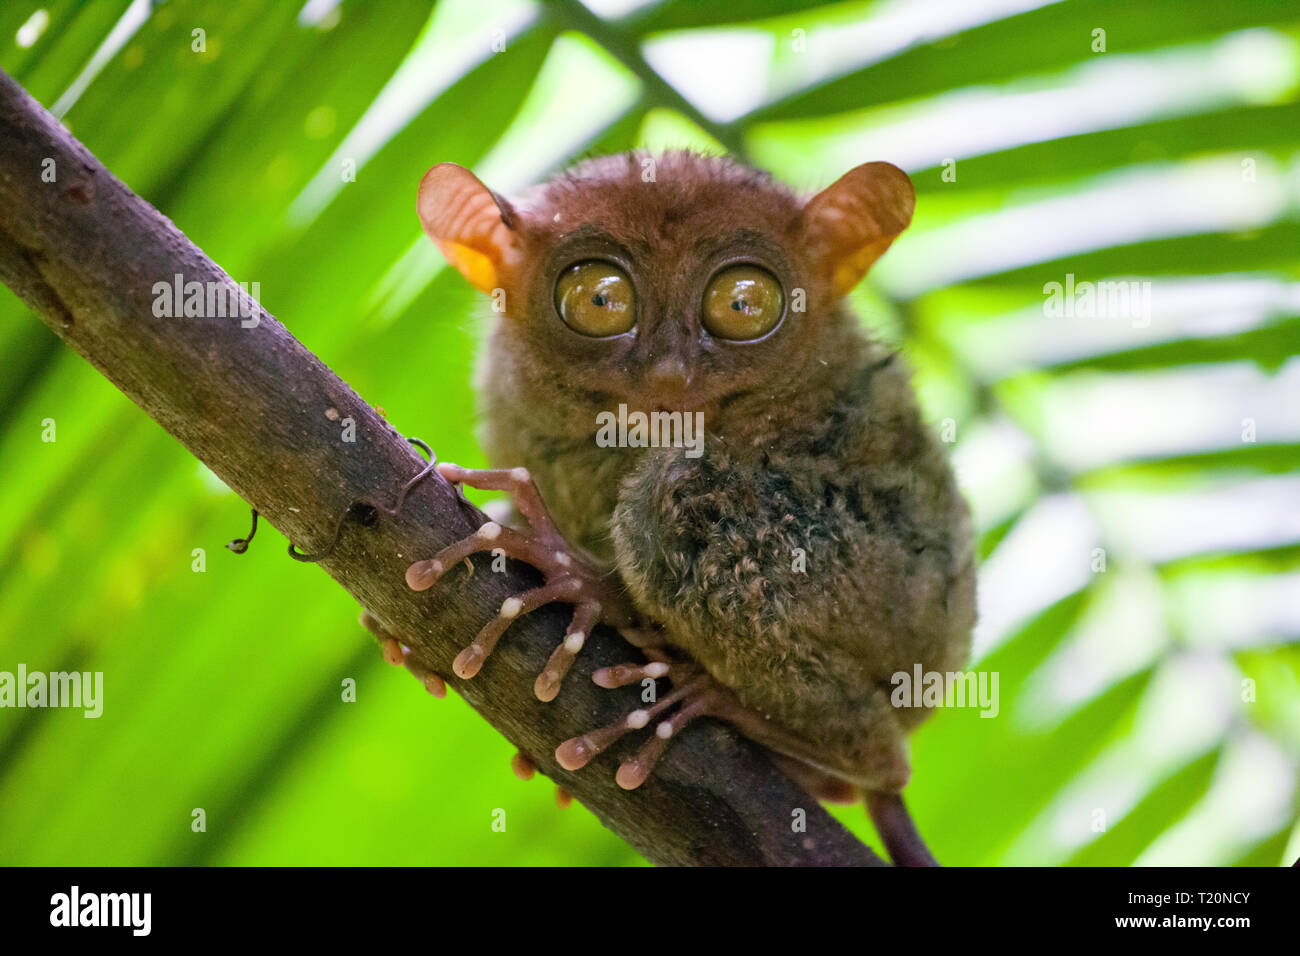 Phillipine Tarsier ,Tarsius Syrichta, the world's smallest primate Cute Tarsius monkey with big eyes sitting on a branch with green leaves. Bohol isla Stock Photo